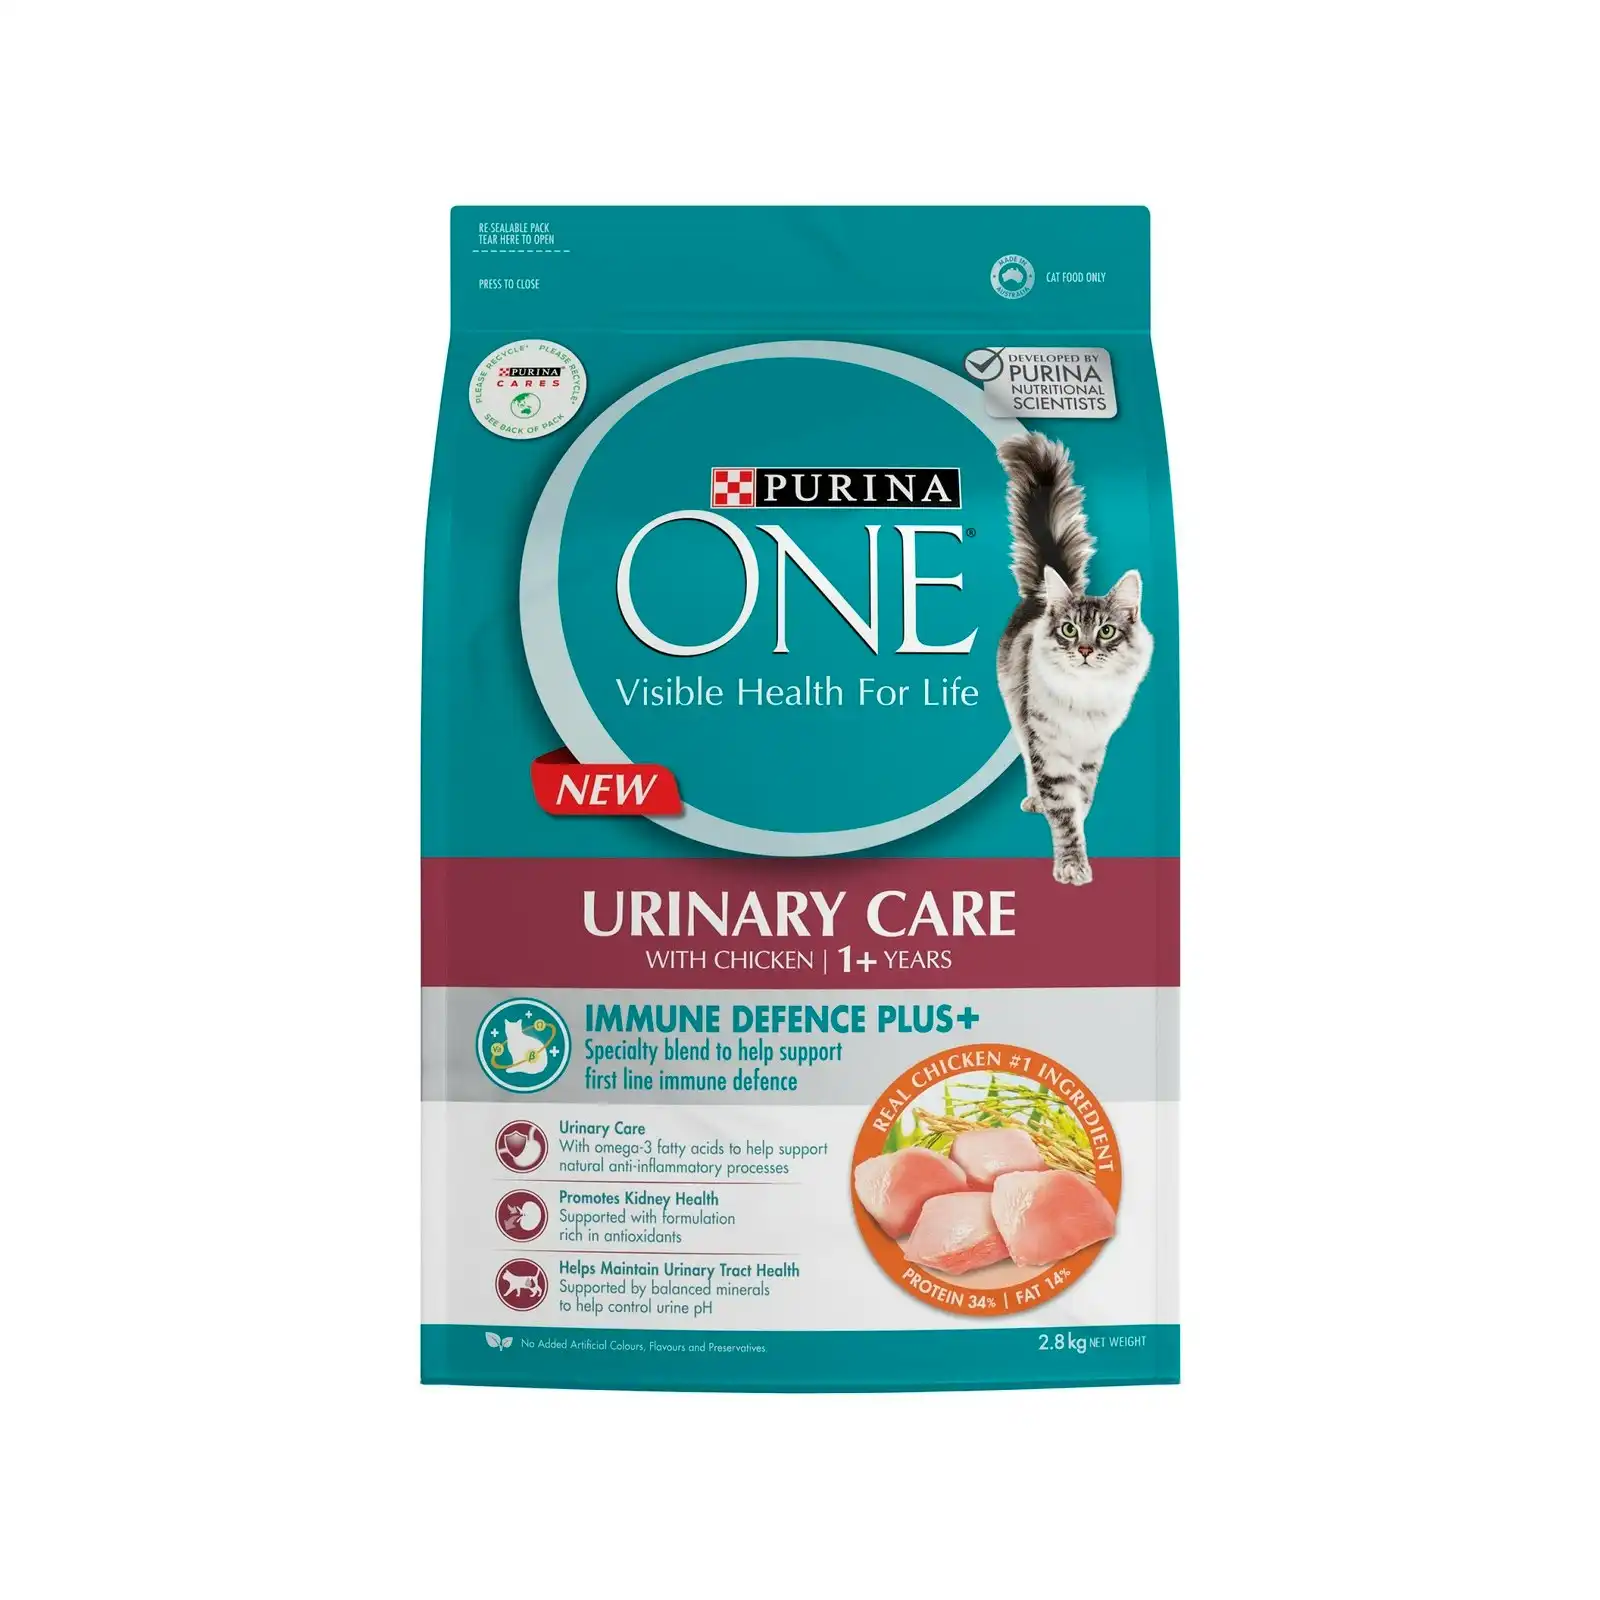 Purina One Adult Urinary Care Chicken Cat Dry Food 2.8kg